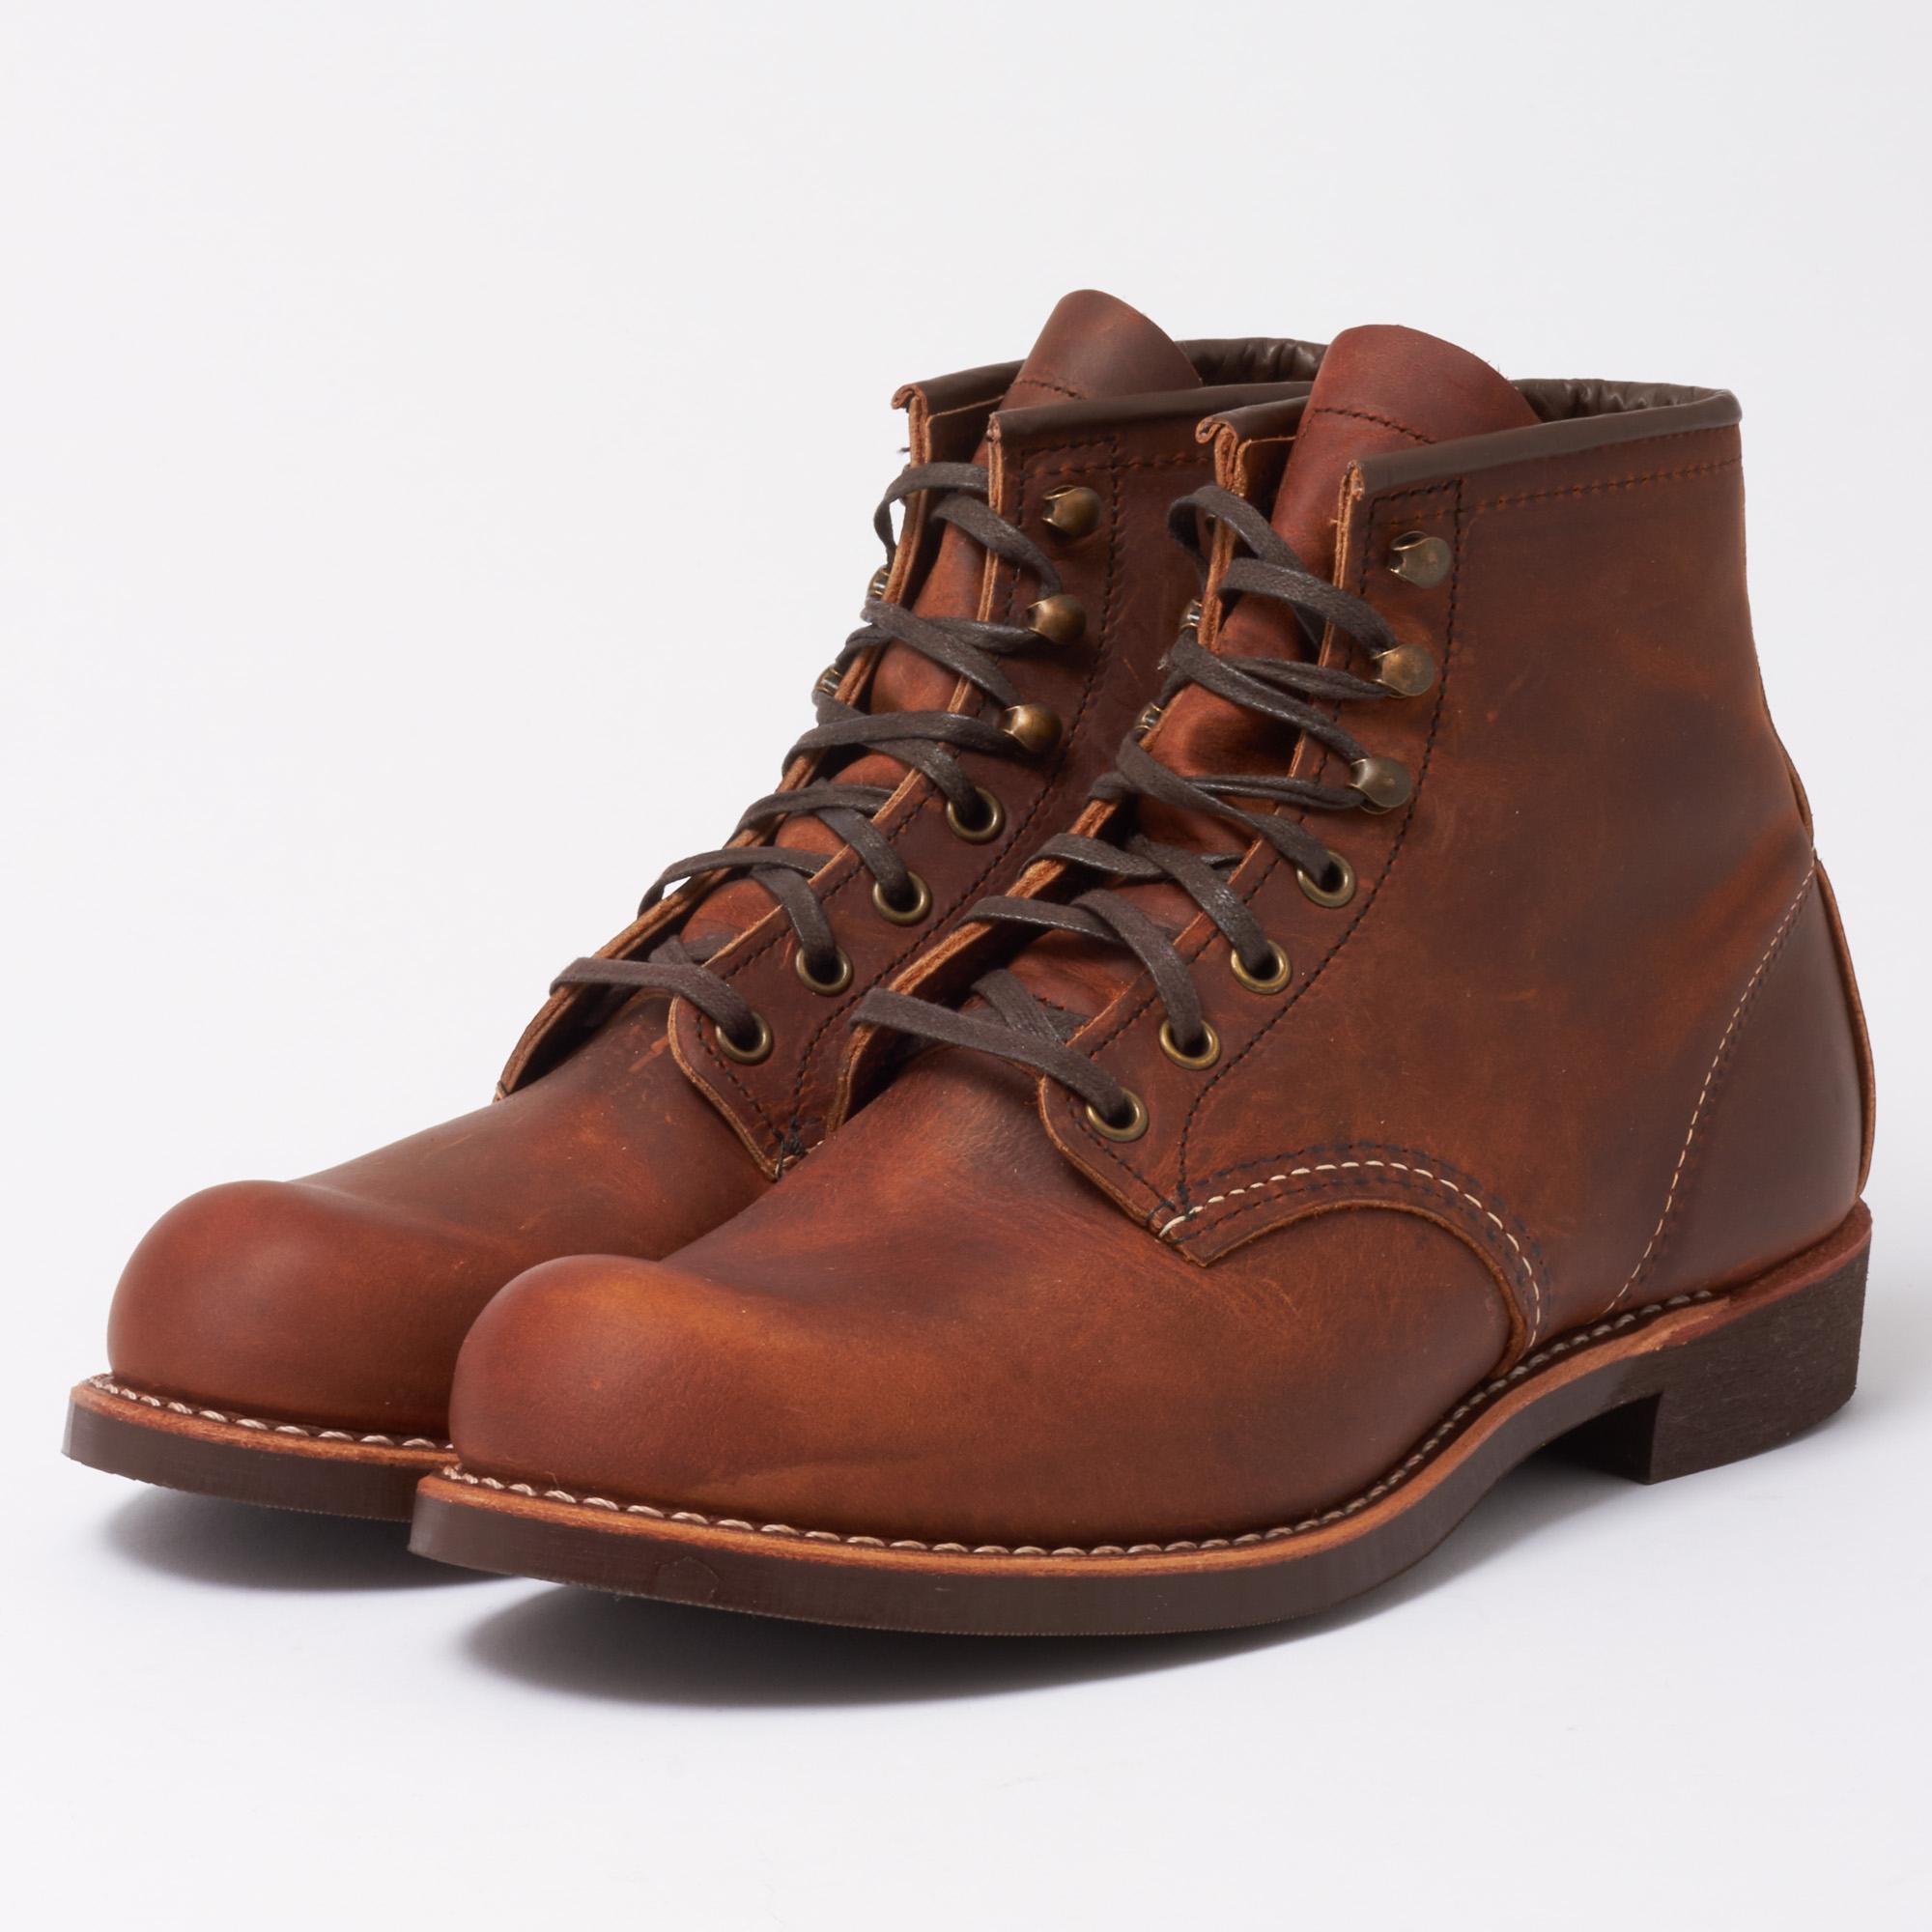 Lyst - Red Wing Blacksmith 3343 Copper Leather Boots in Brown for Men